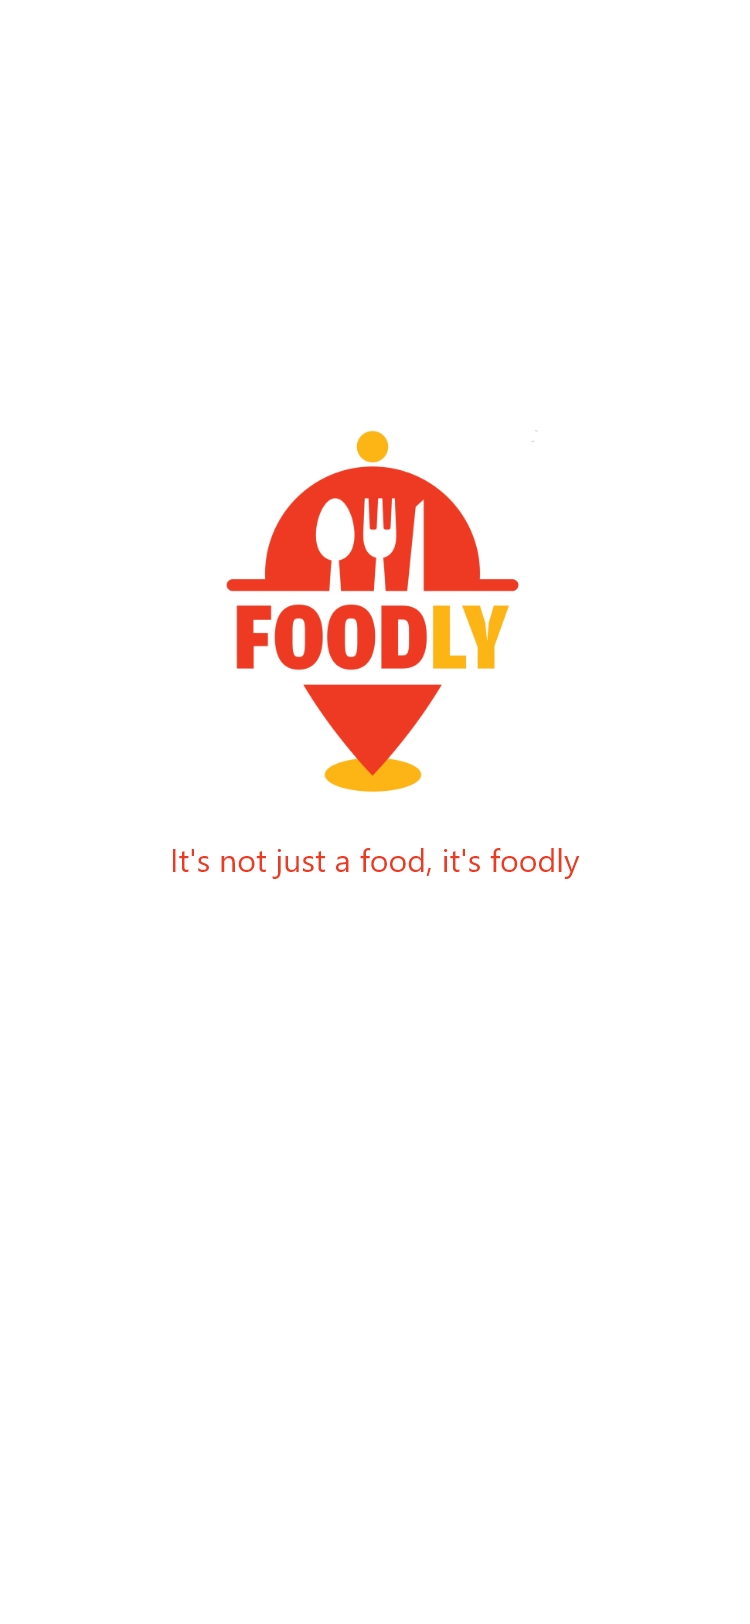 Food E-commerce : It aims to provide the customer with online services for ordering and delivery of foods.
                        The application has been a major impact  in these CoVID situation as large number of people are ordering from their home and trying to decrease the spread.  